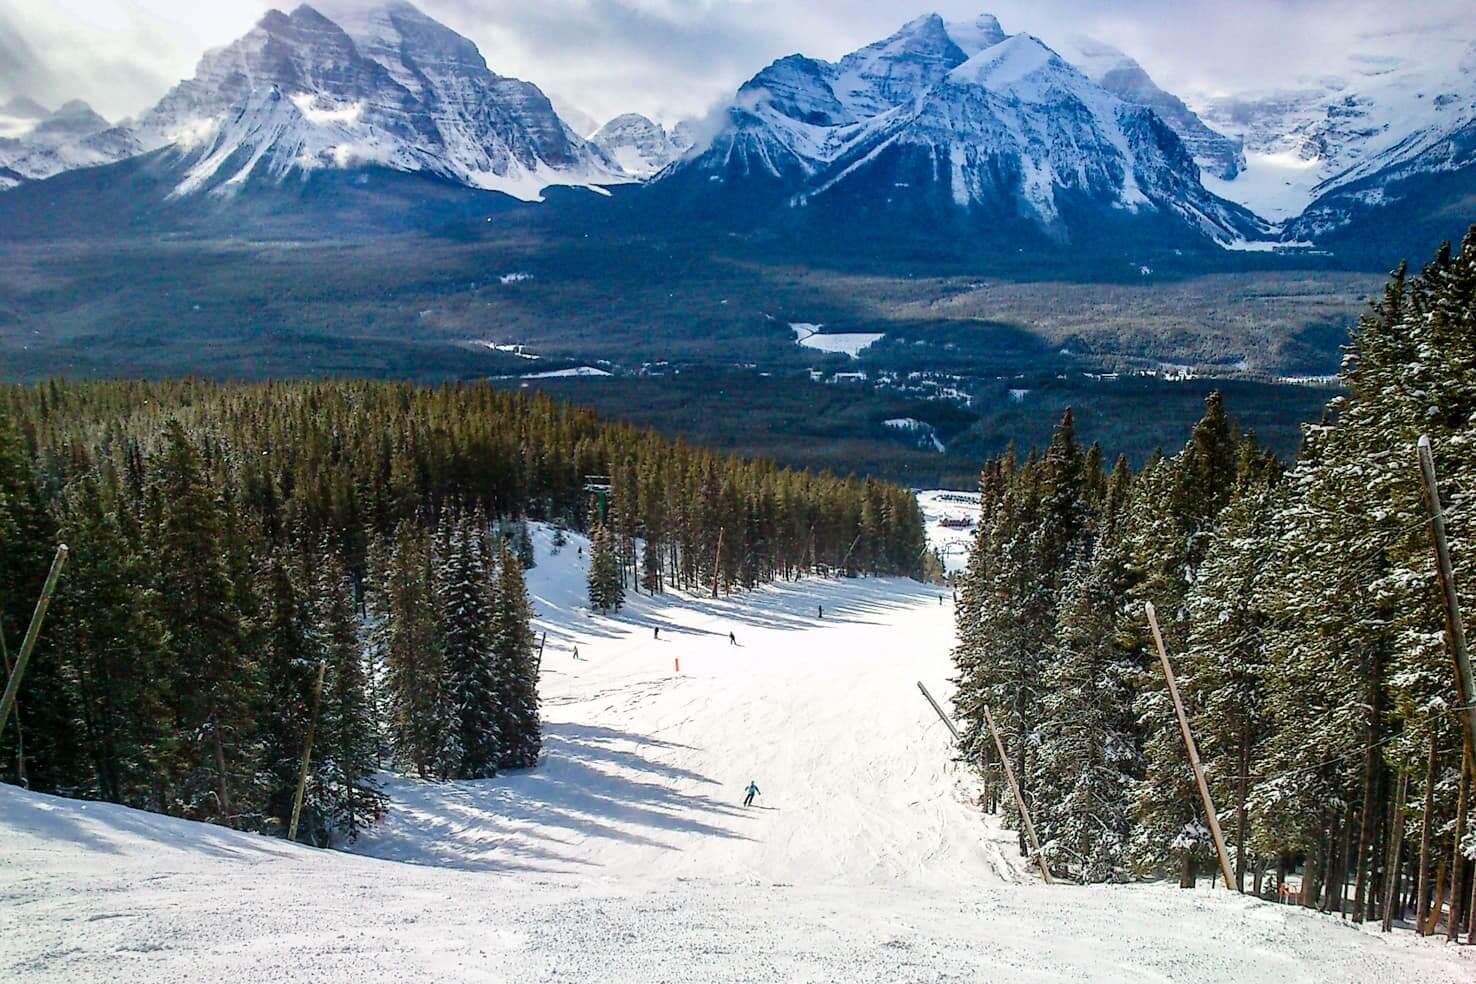 100 best things to do in Banff National Park, Canada - Ski at world class Lake Louise resort